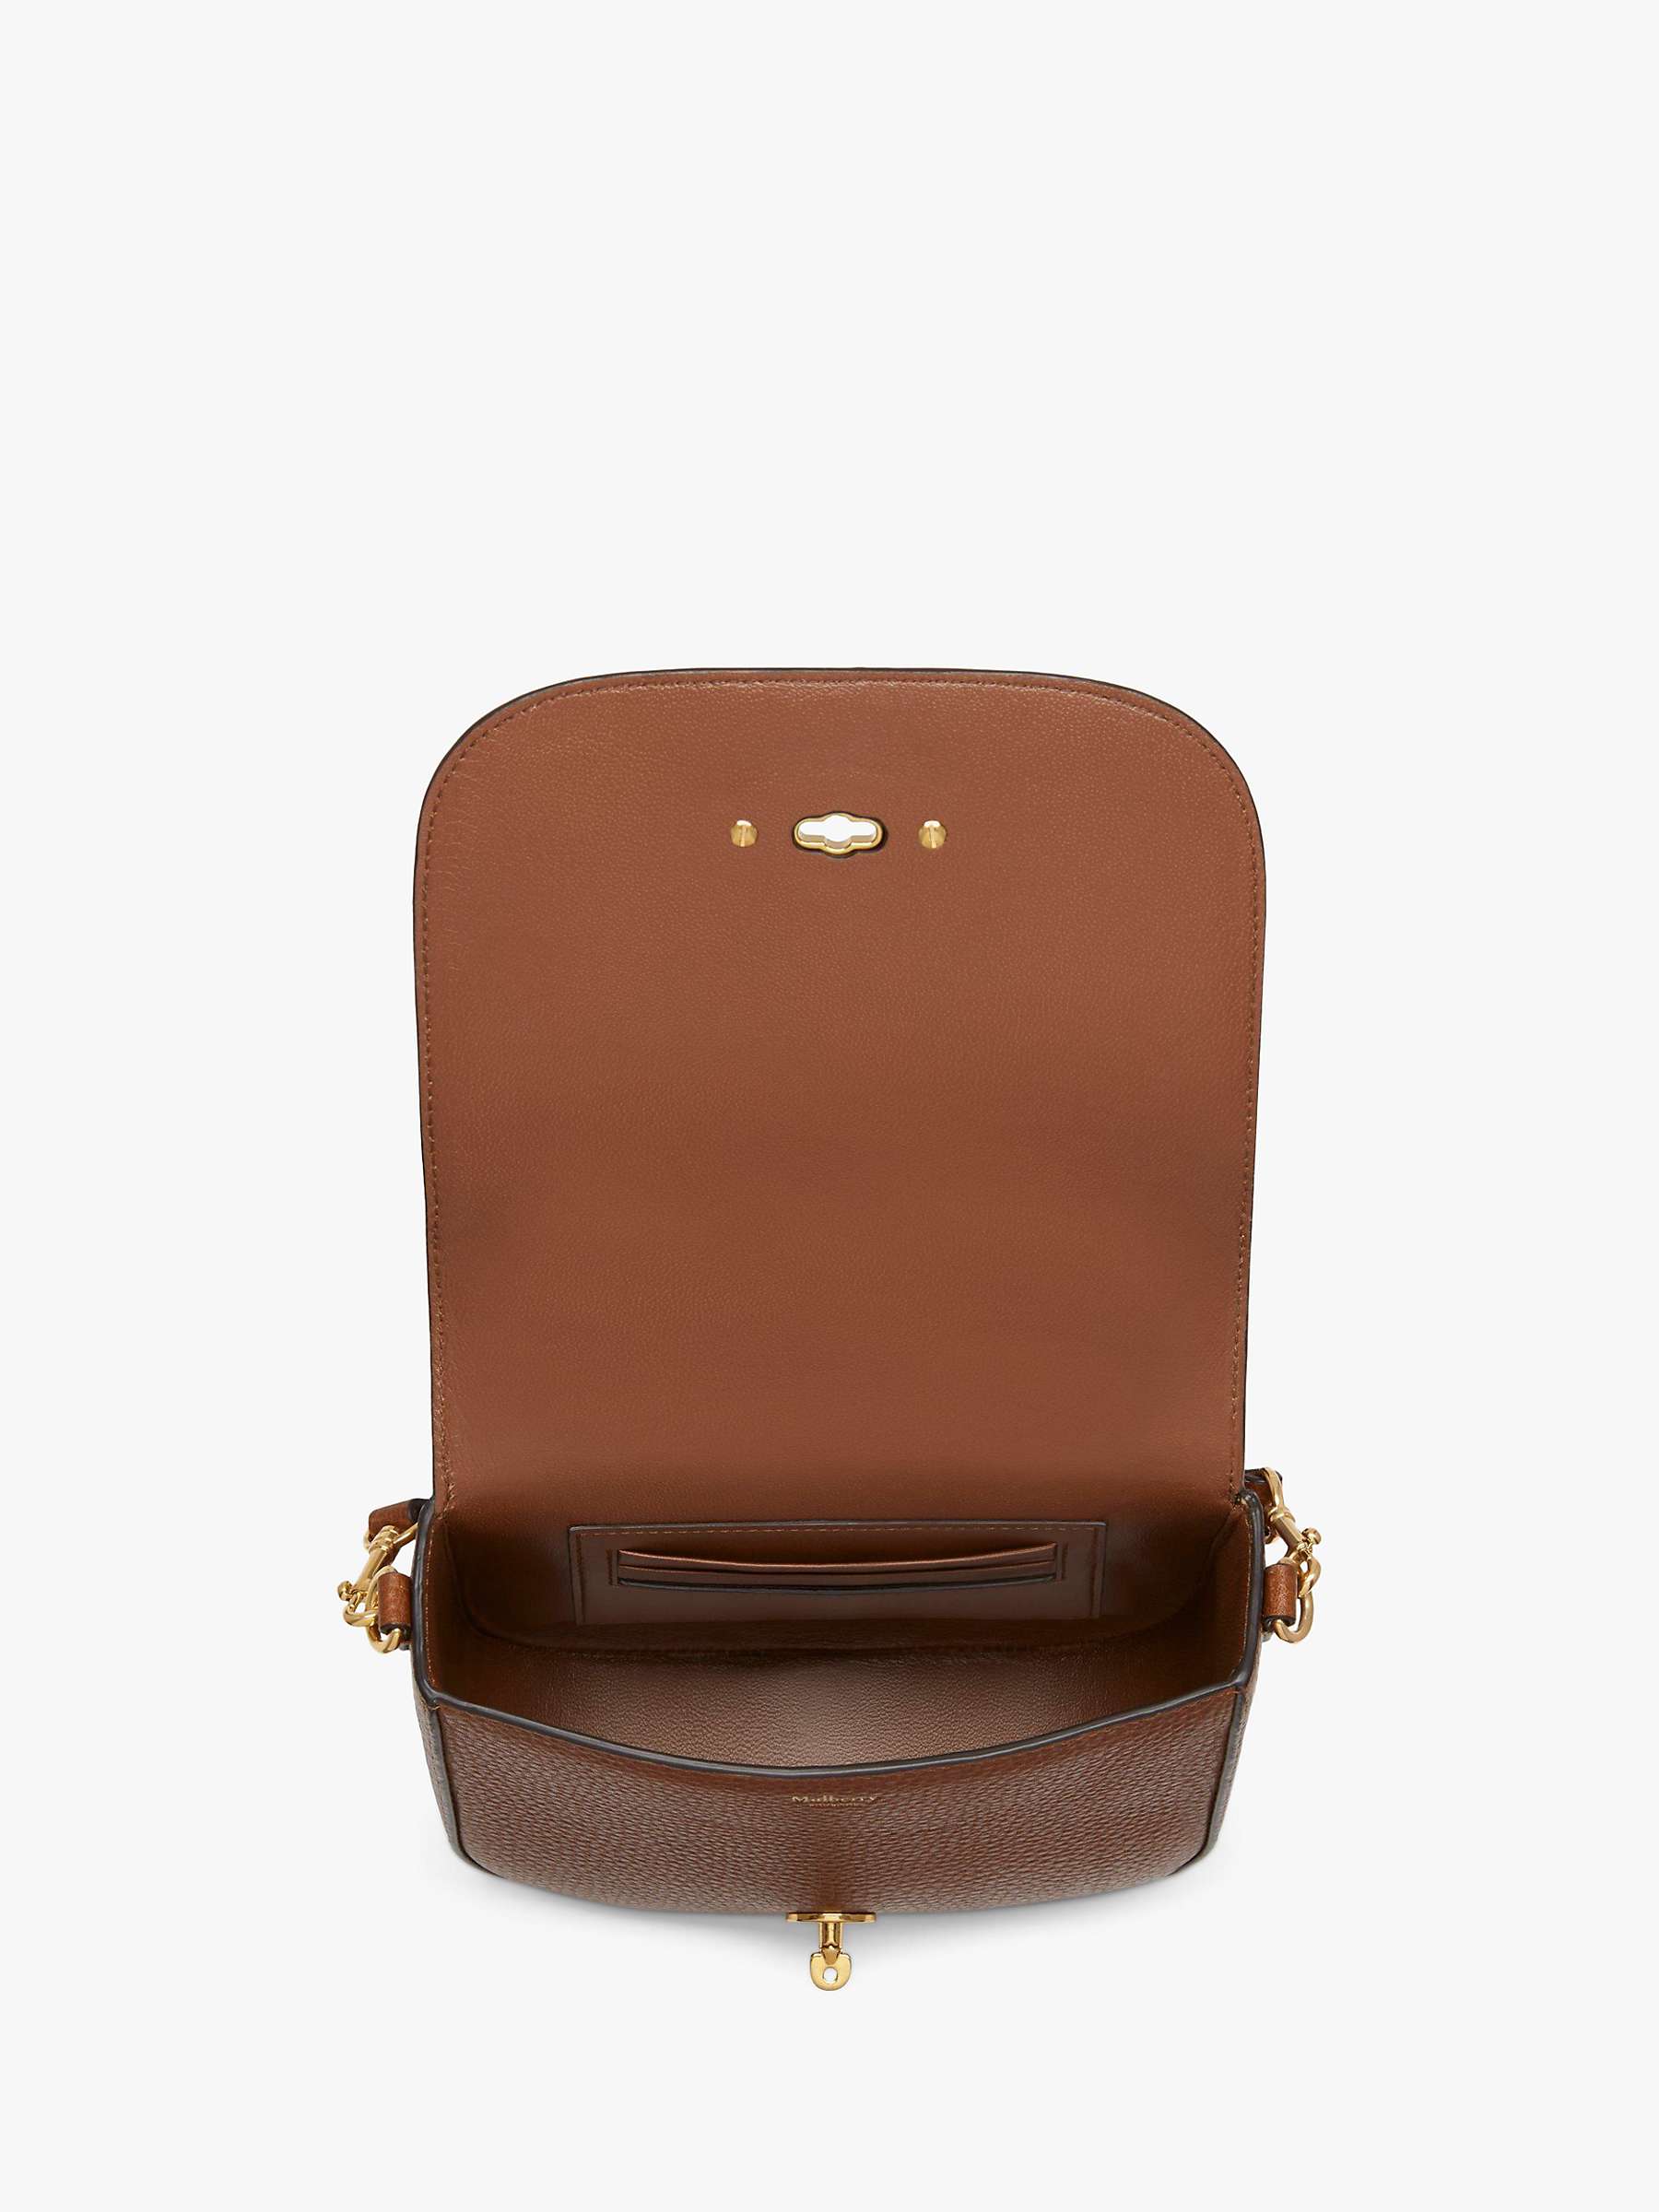 Buy Mulberry Small Darley Classic Grain Leather Satchel Bag Online at johnlewis.com